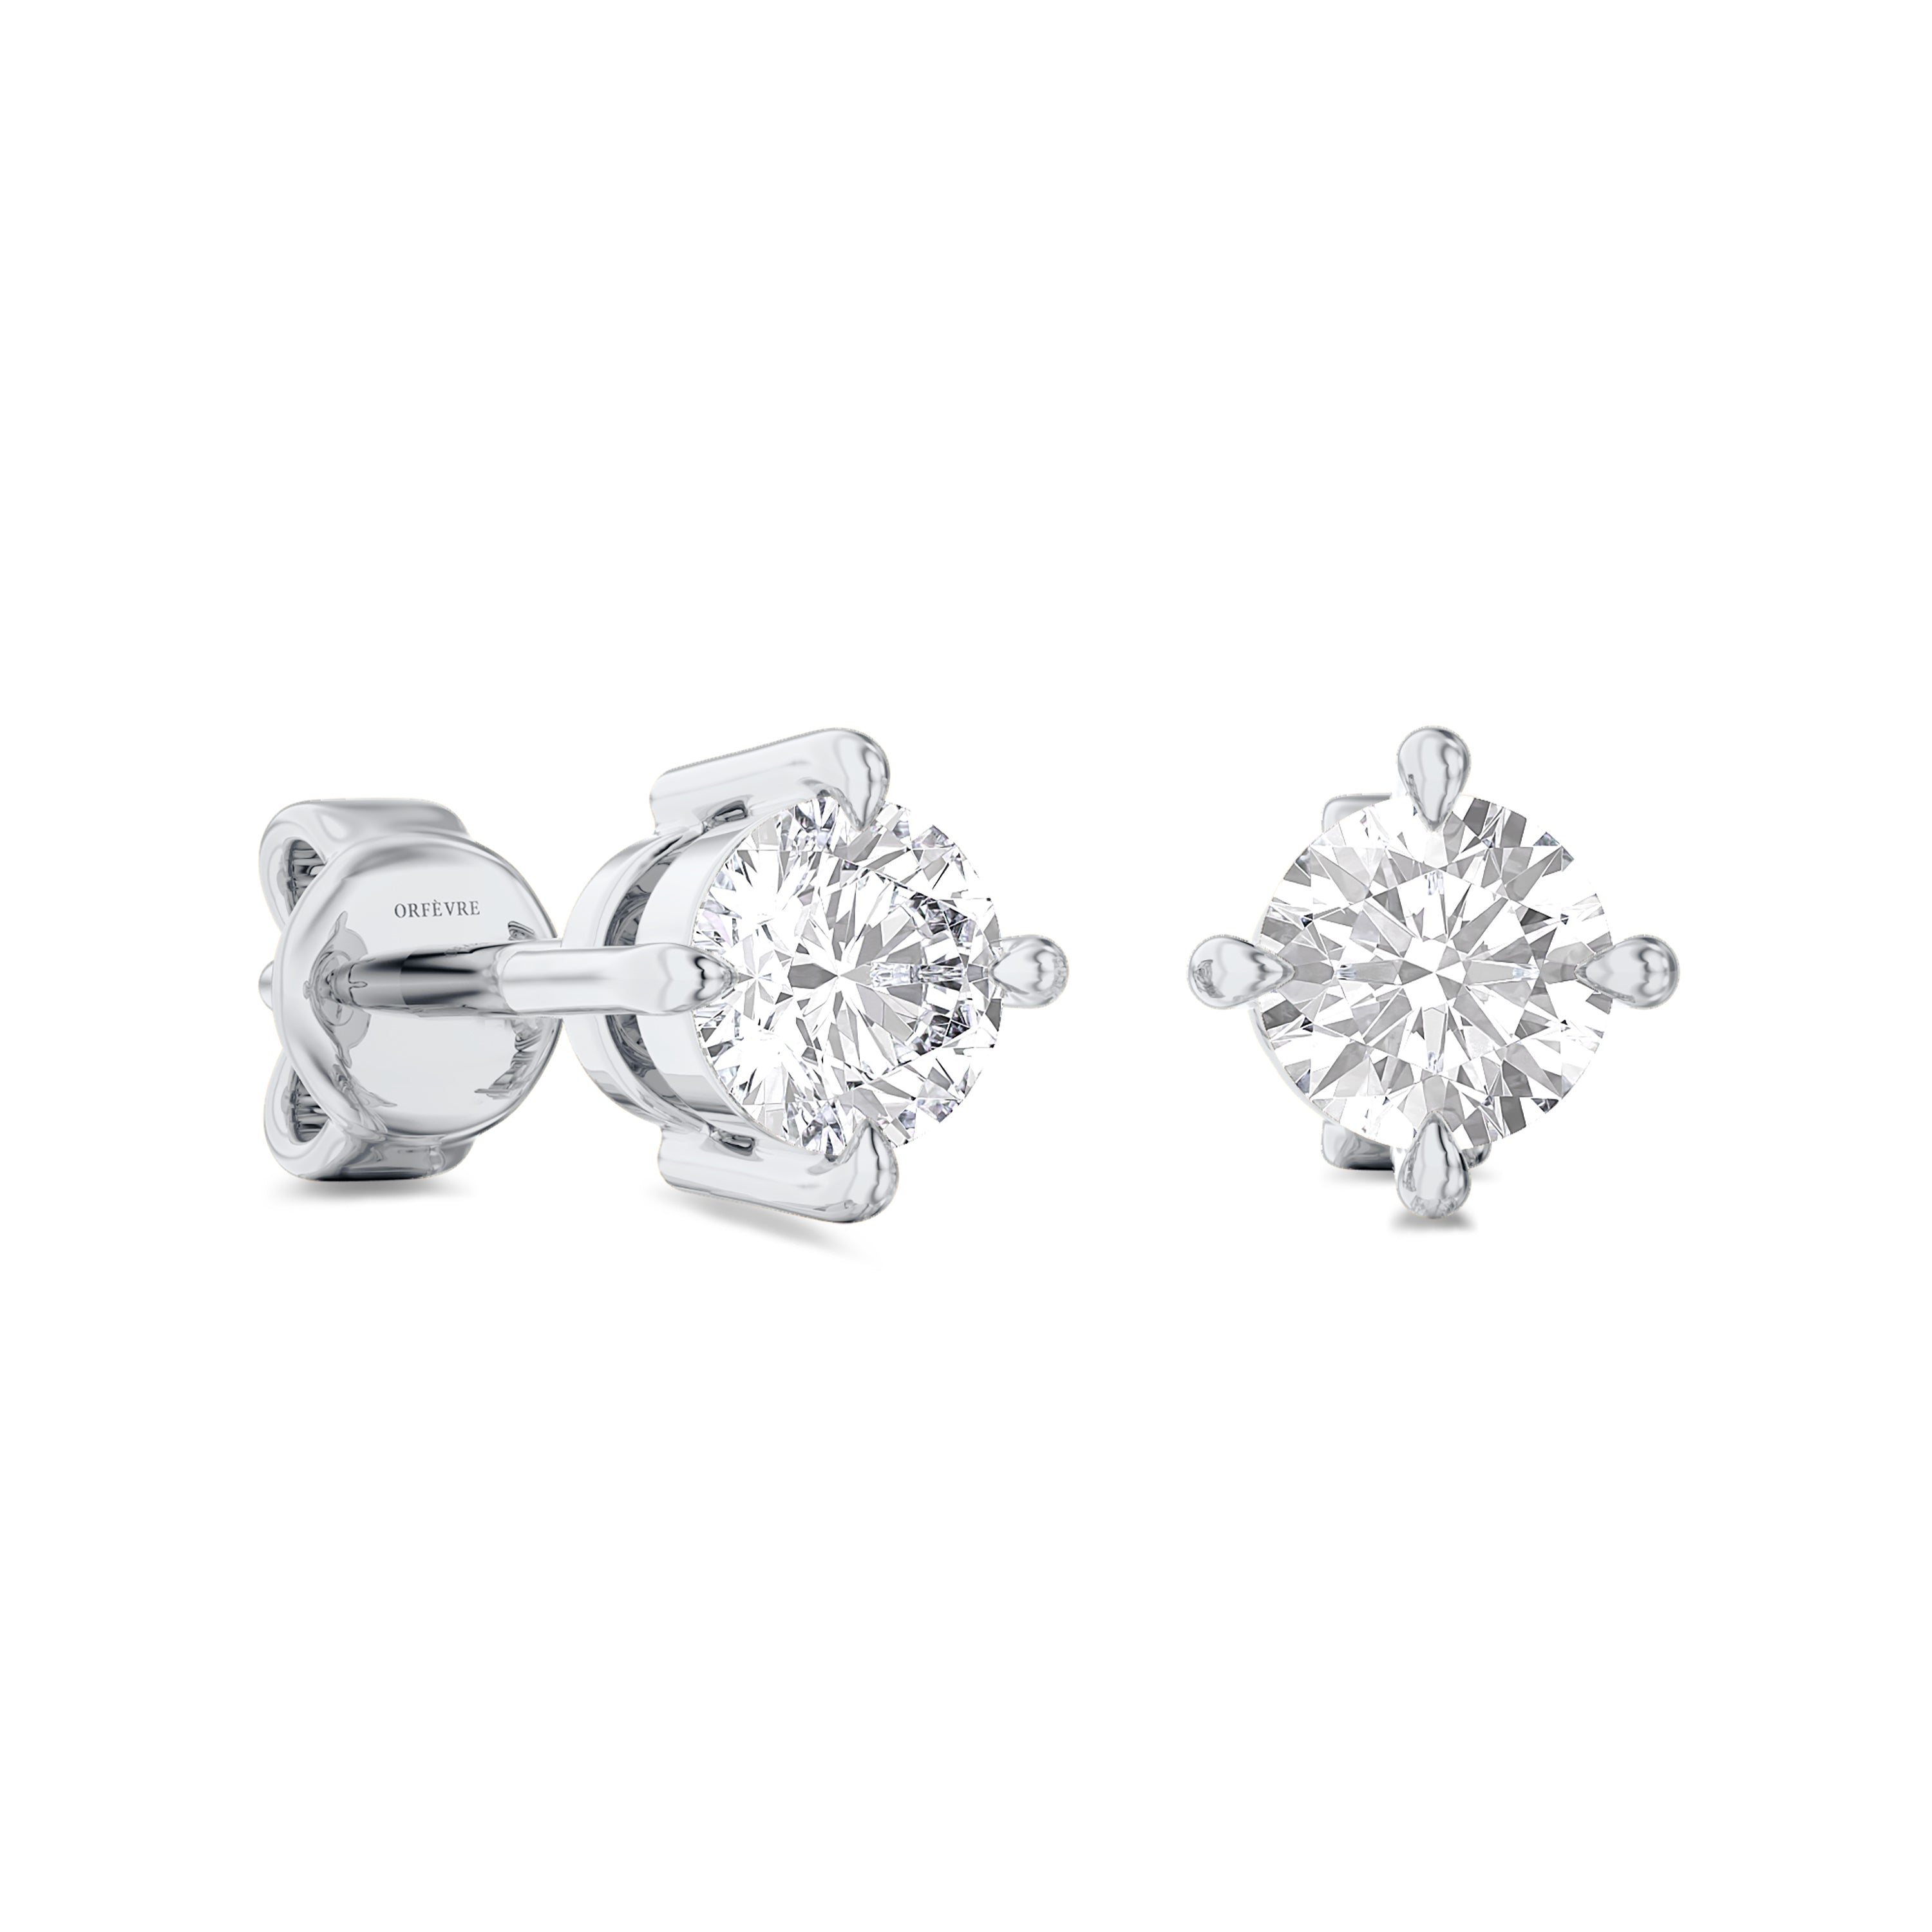 0.40 carat solitaire diamond earrings in 18K white gold, GH color and SI clarity